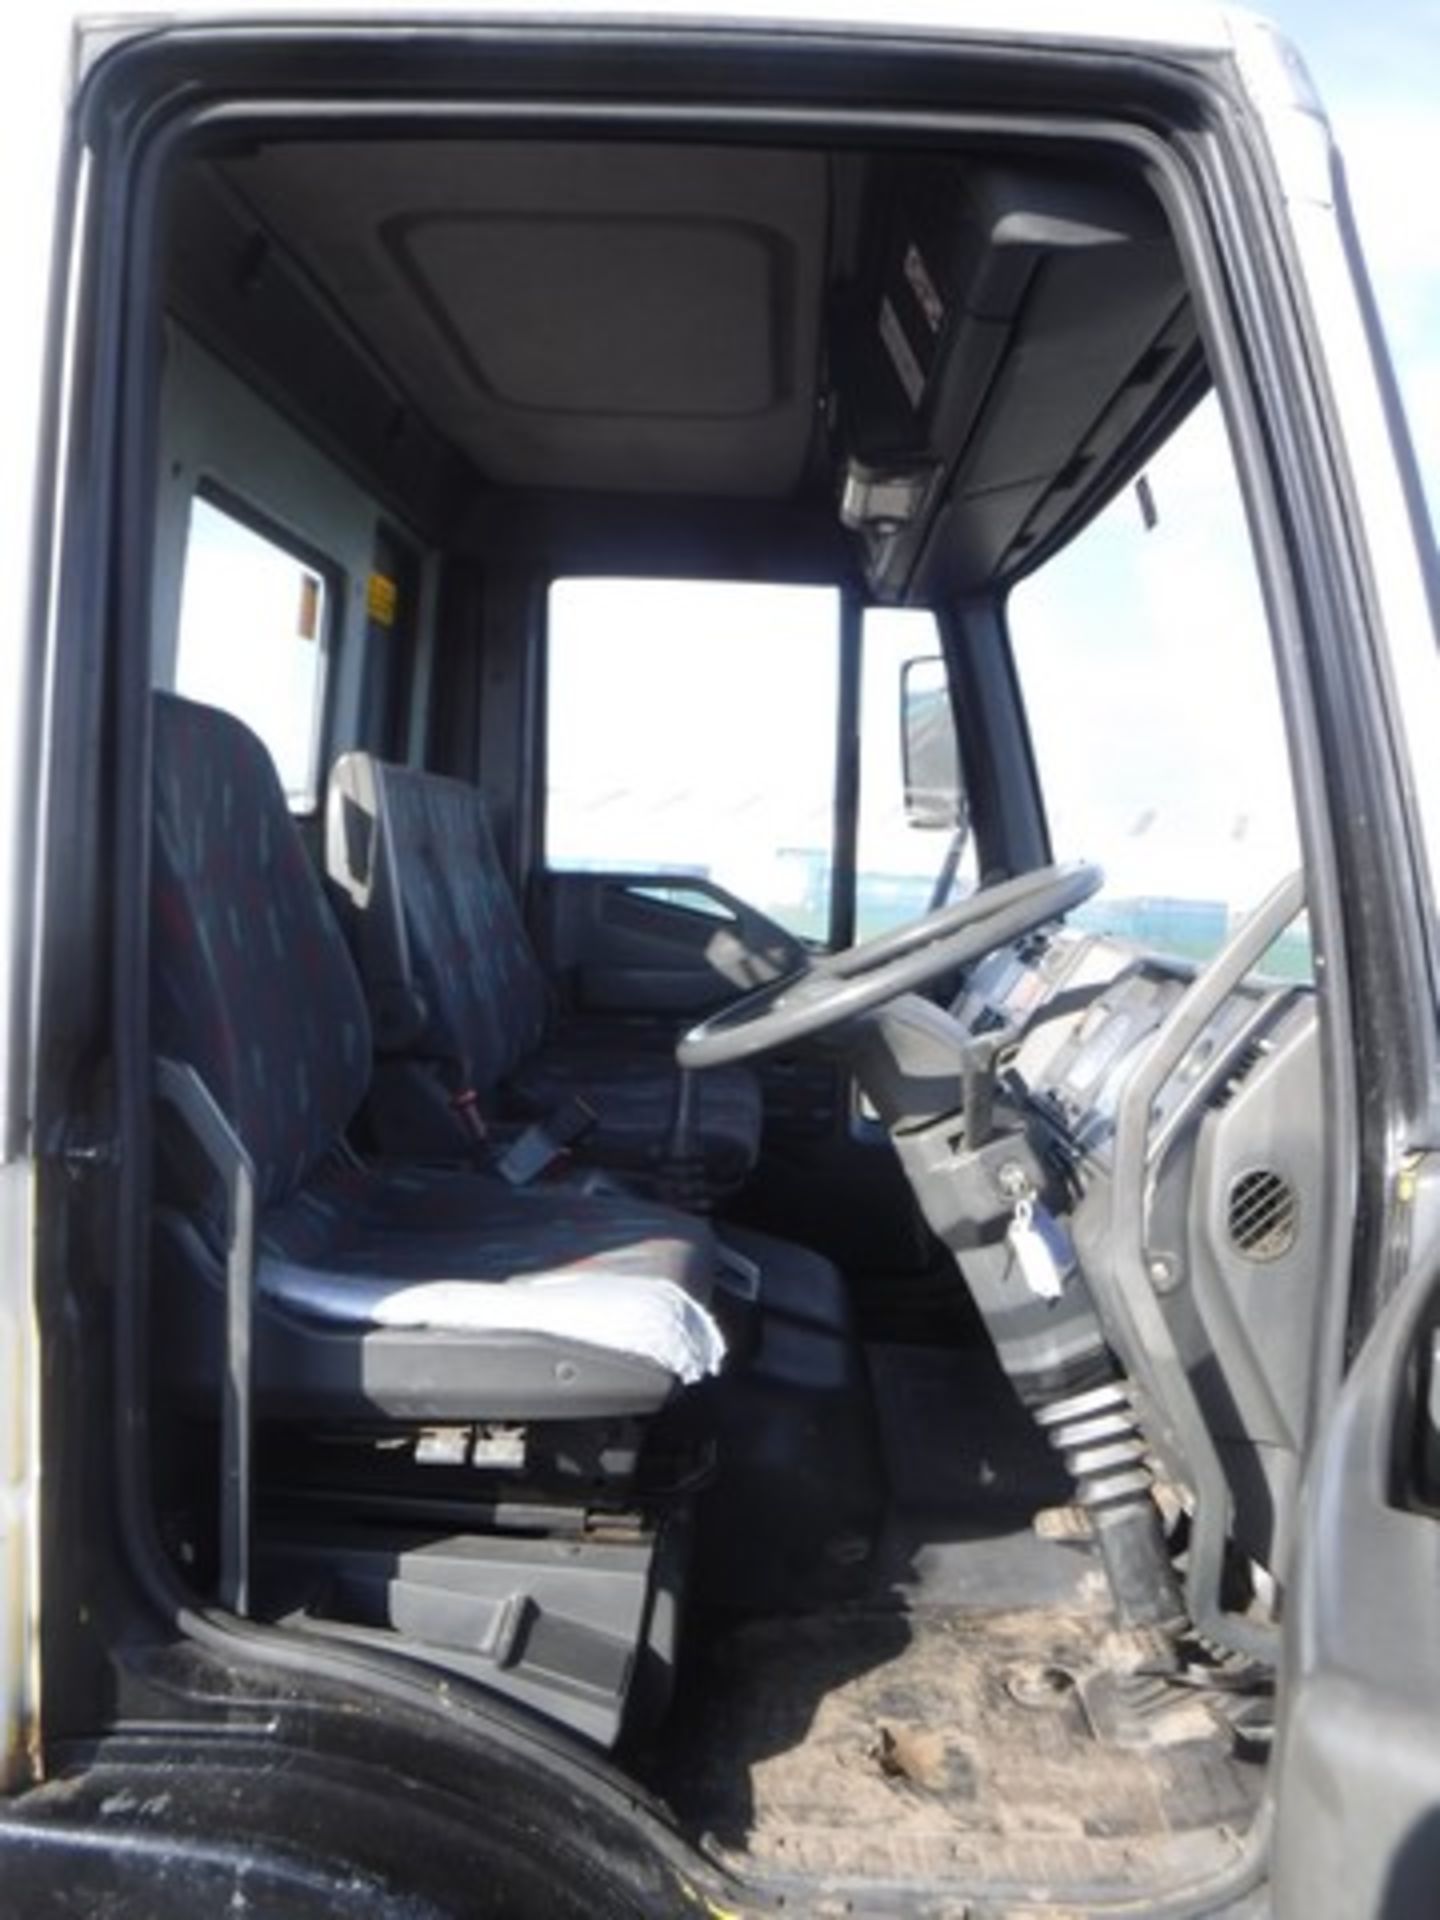 IVECO-FORD NEW CARGO 75 E15 - 5861cc - Image 6 of 18